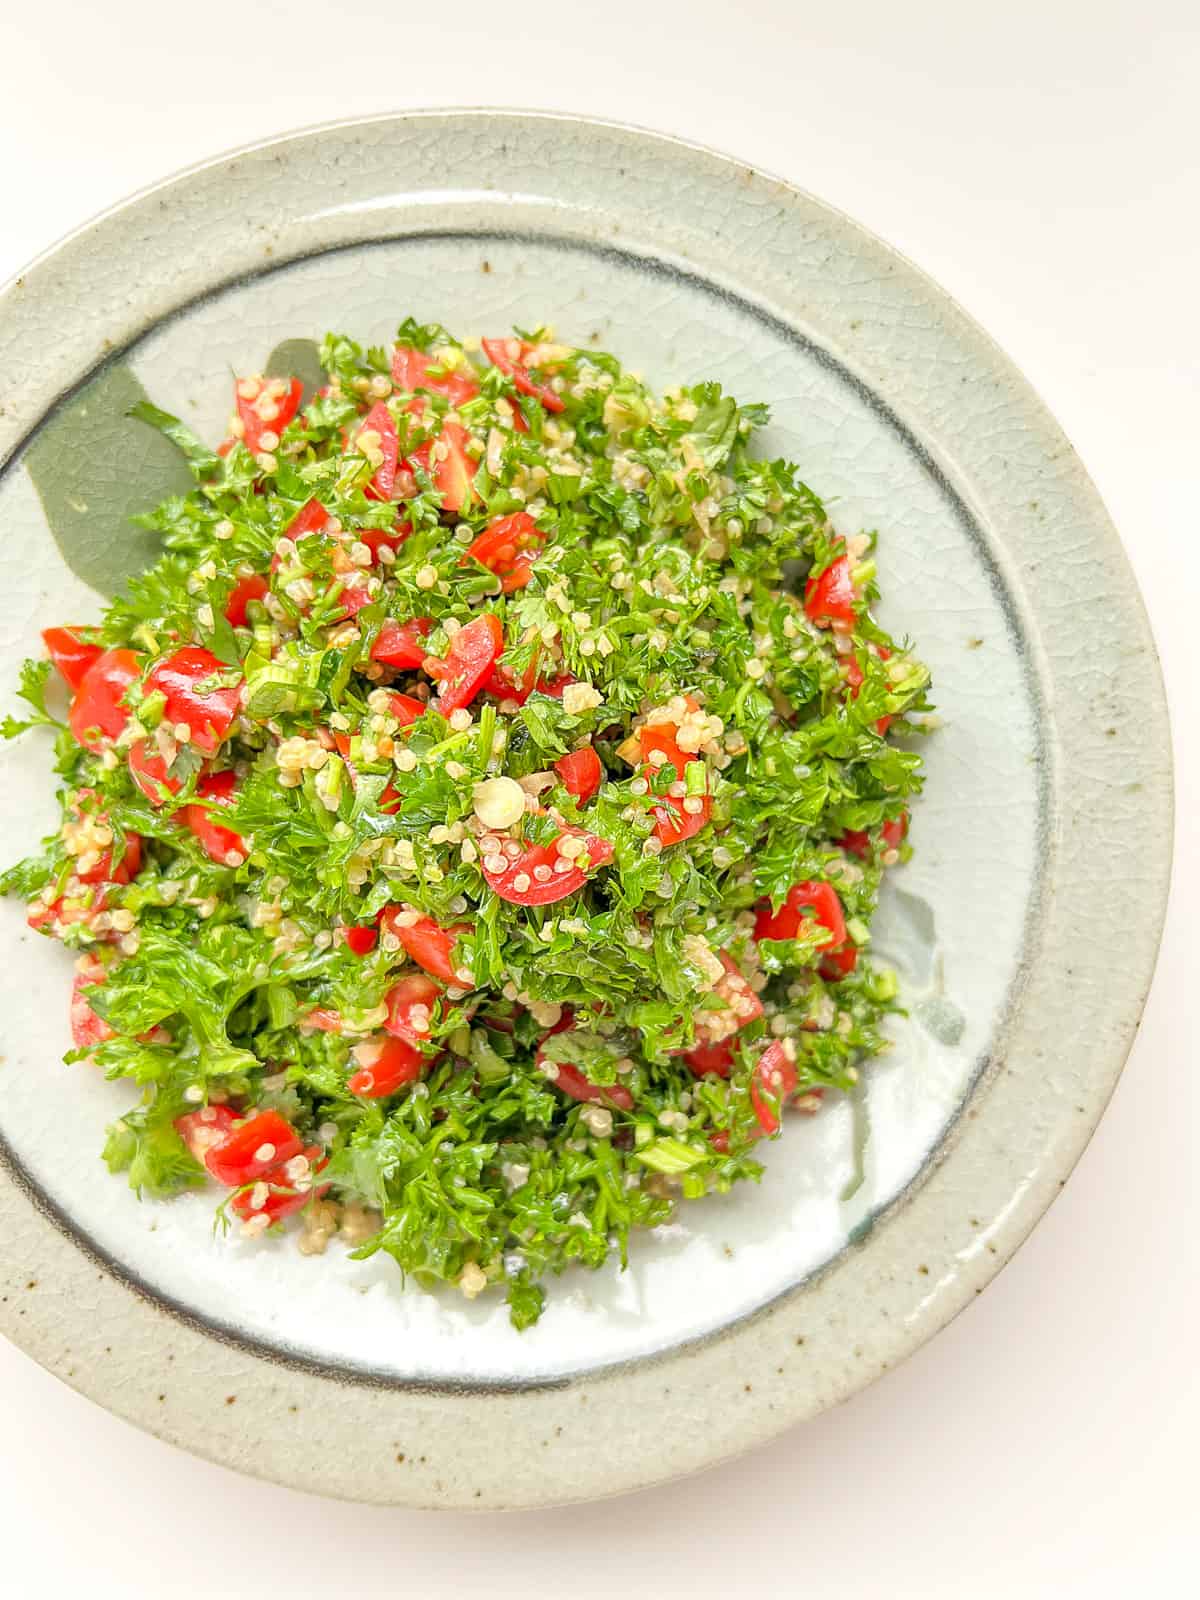 A ceramic dish filled with tabbouleh.